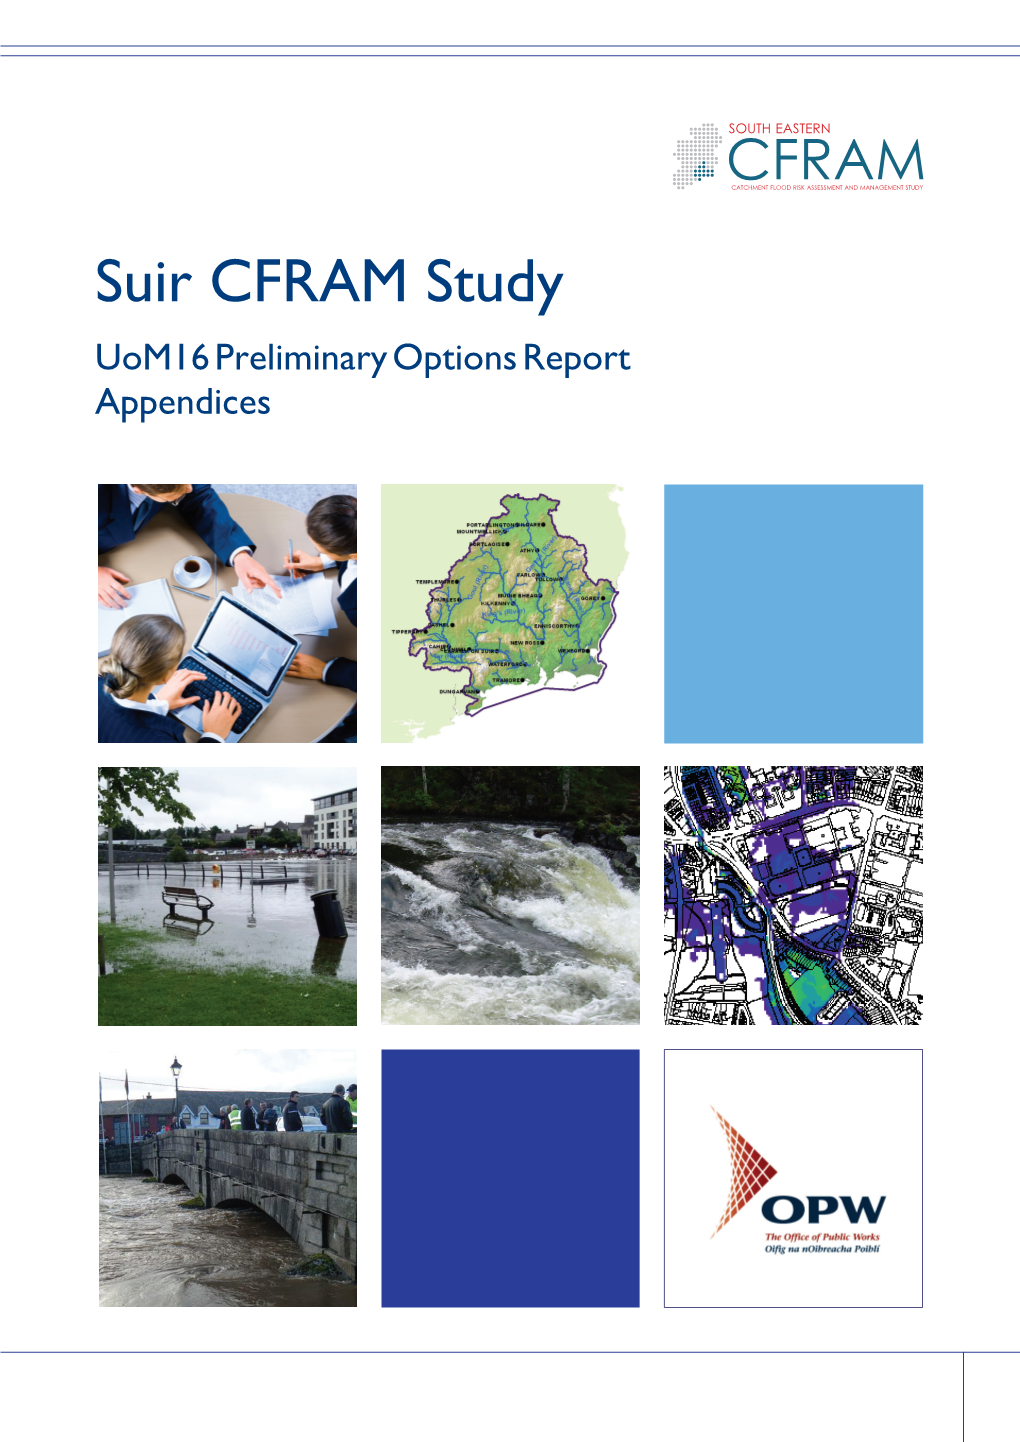 Suir CFRAM Study Uom16 Preliminary Options Report Appendices